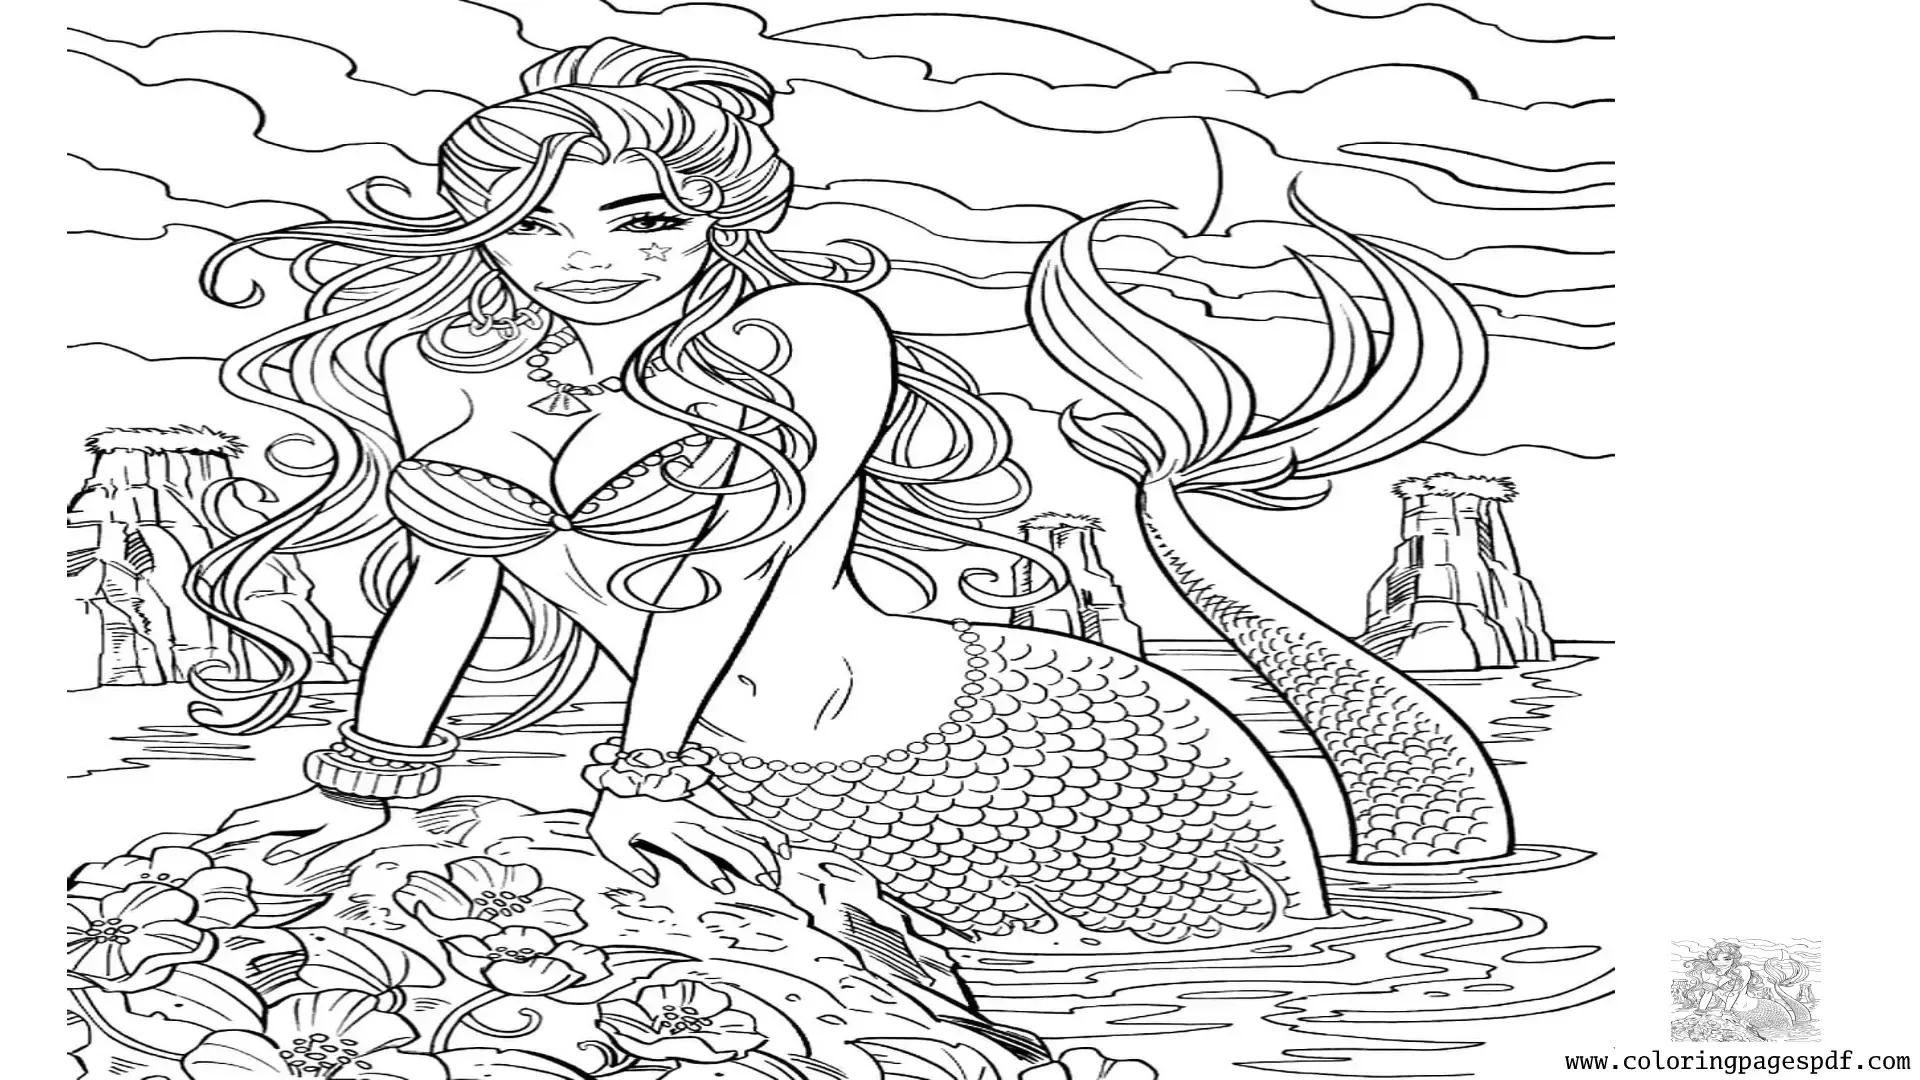 Coloring Page Of A Pretty Mermaid Outside The Water